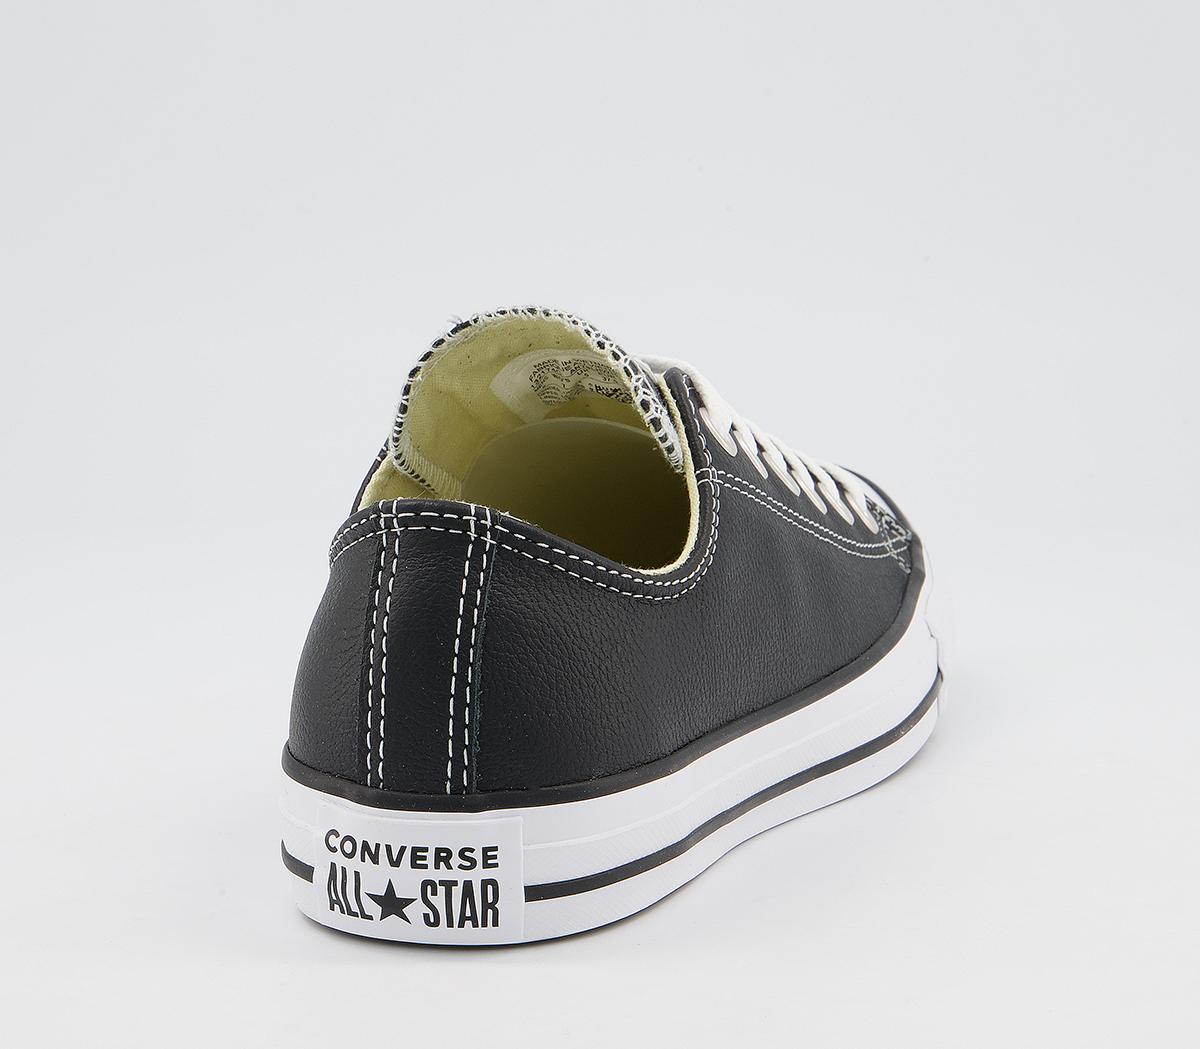 Converse All Star Low Leather Trainers Black White Leather - Unisex Sports